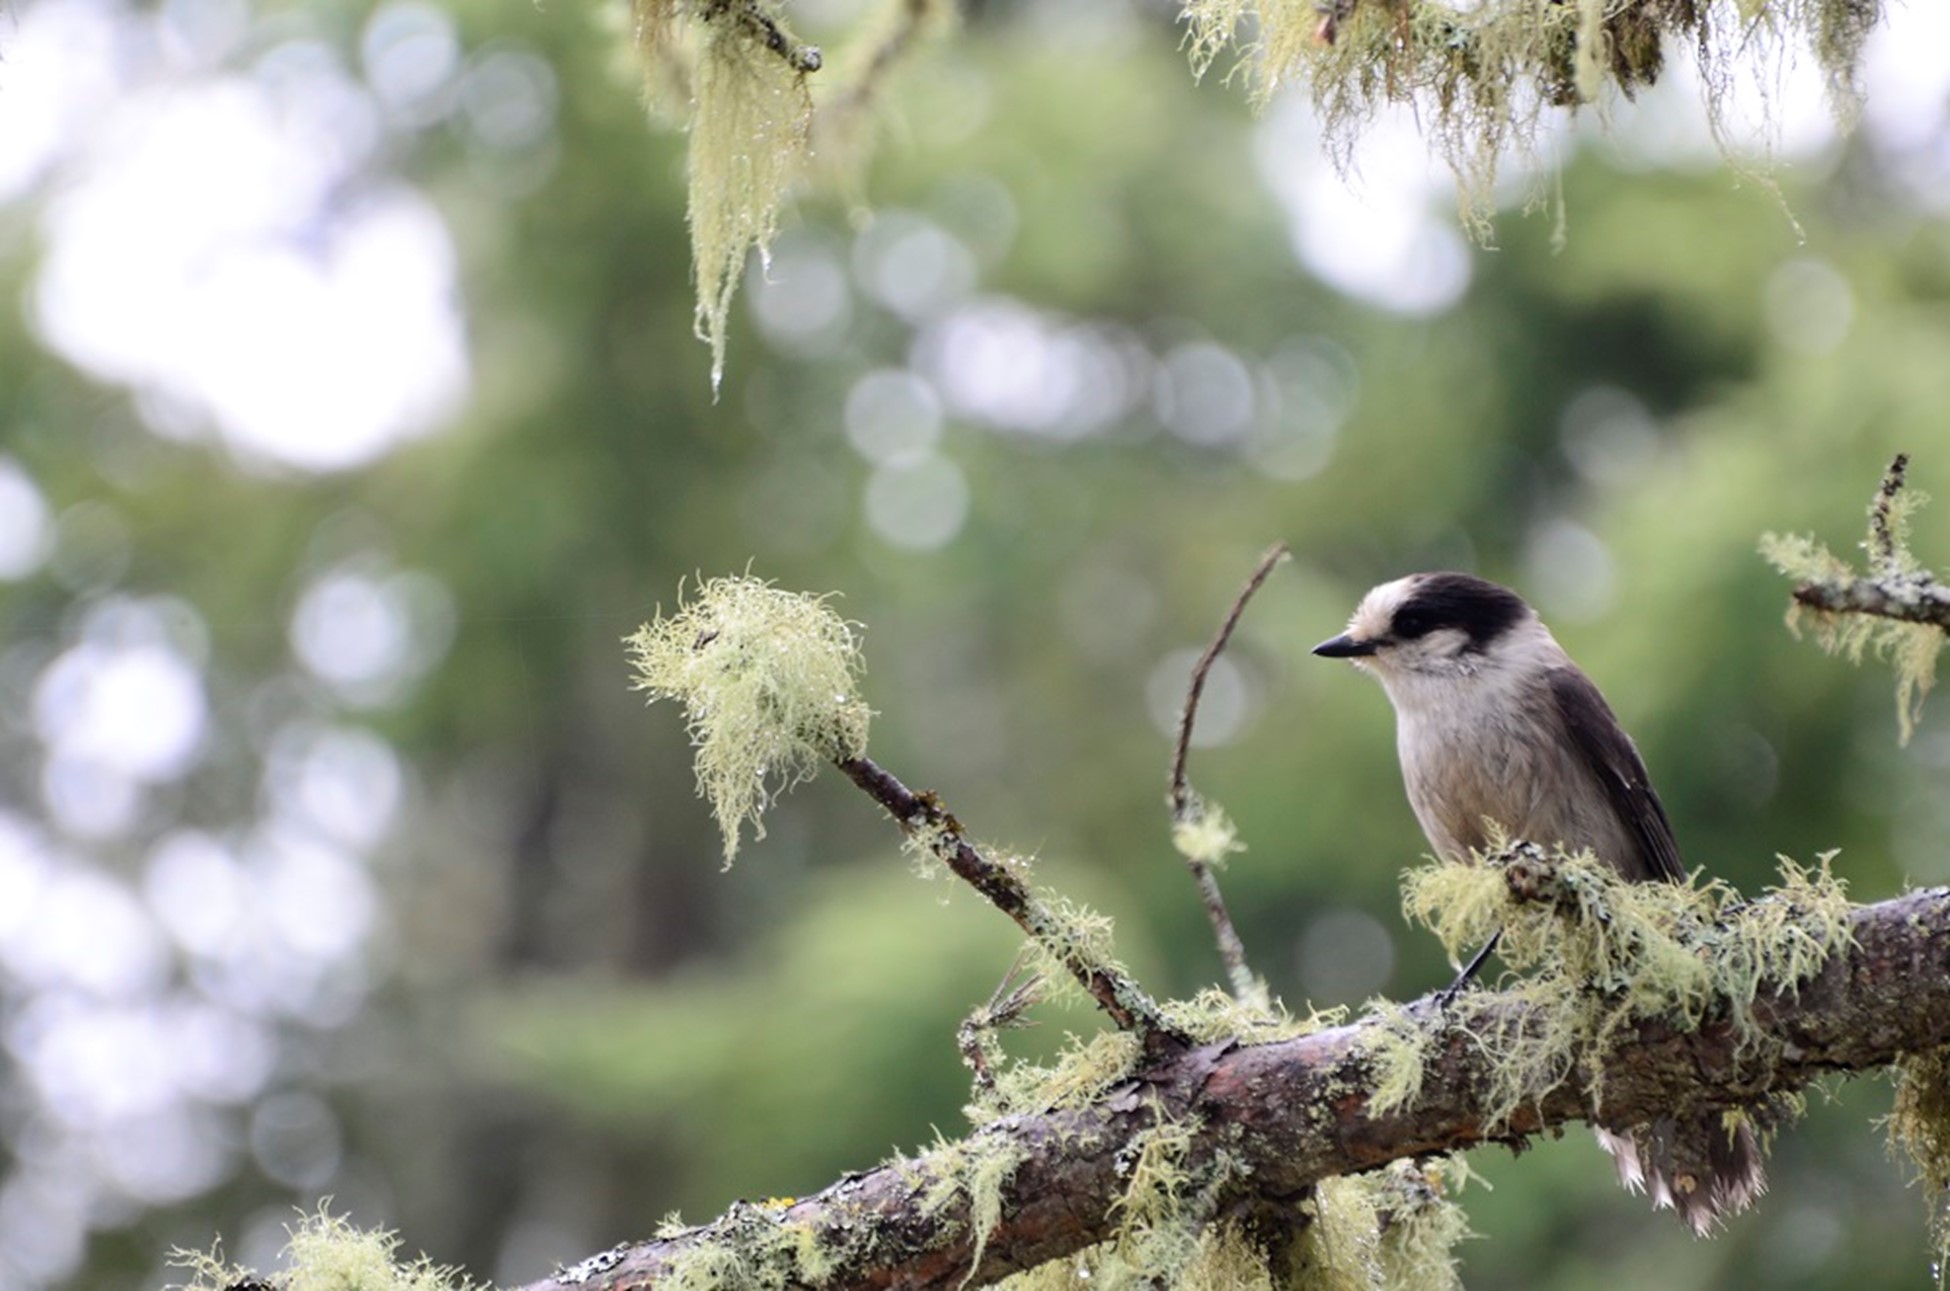 A white bird with black markings sits on a thin lichen-covered tree branch in the forest.